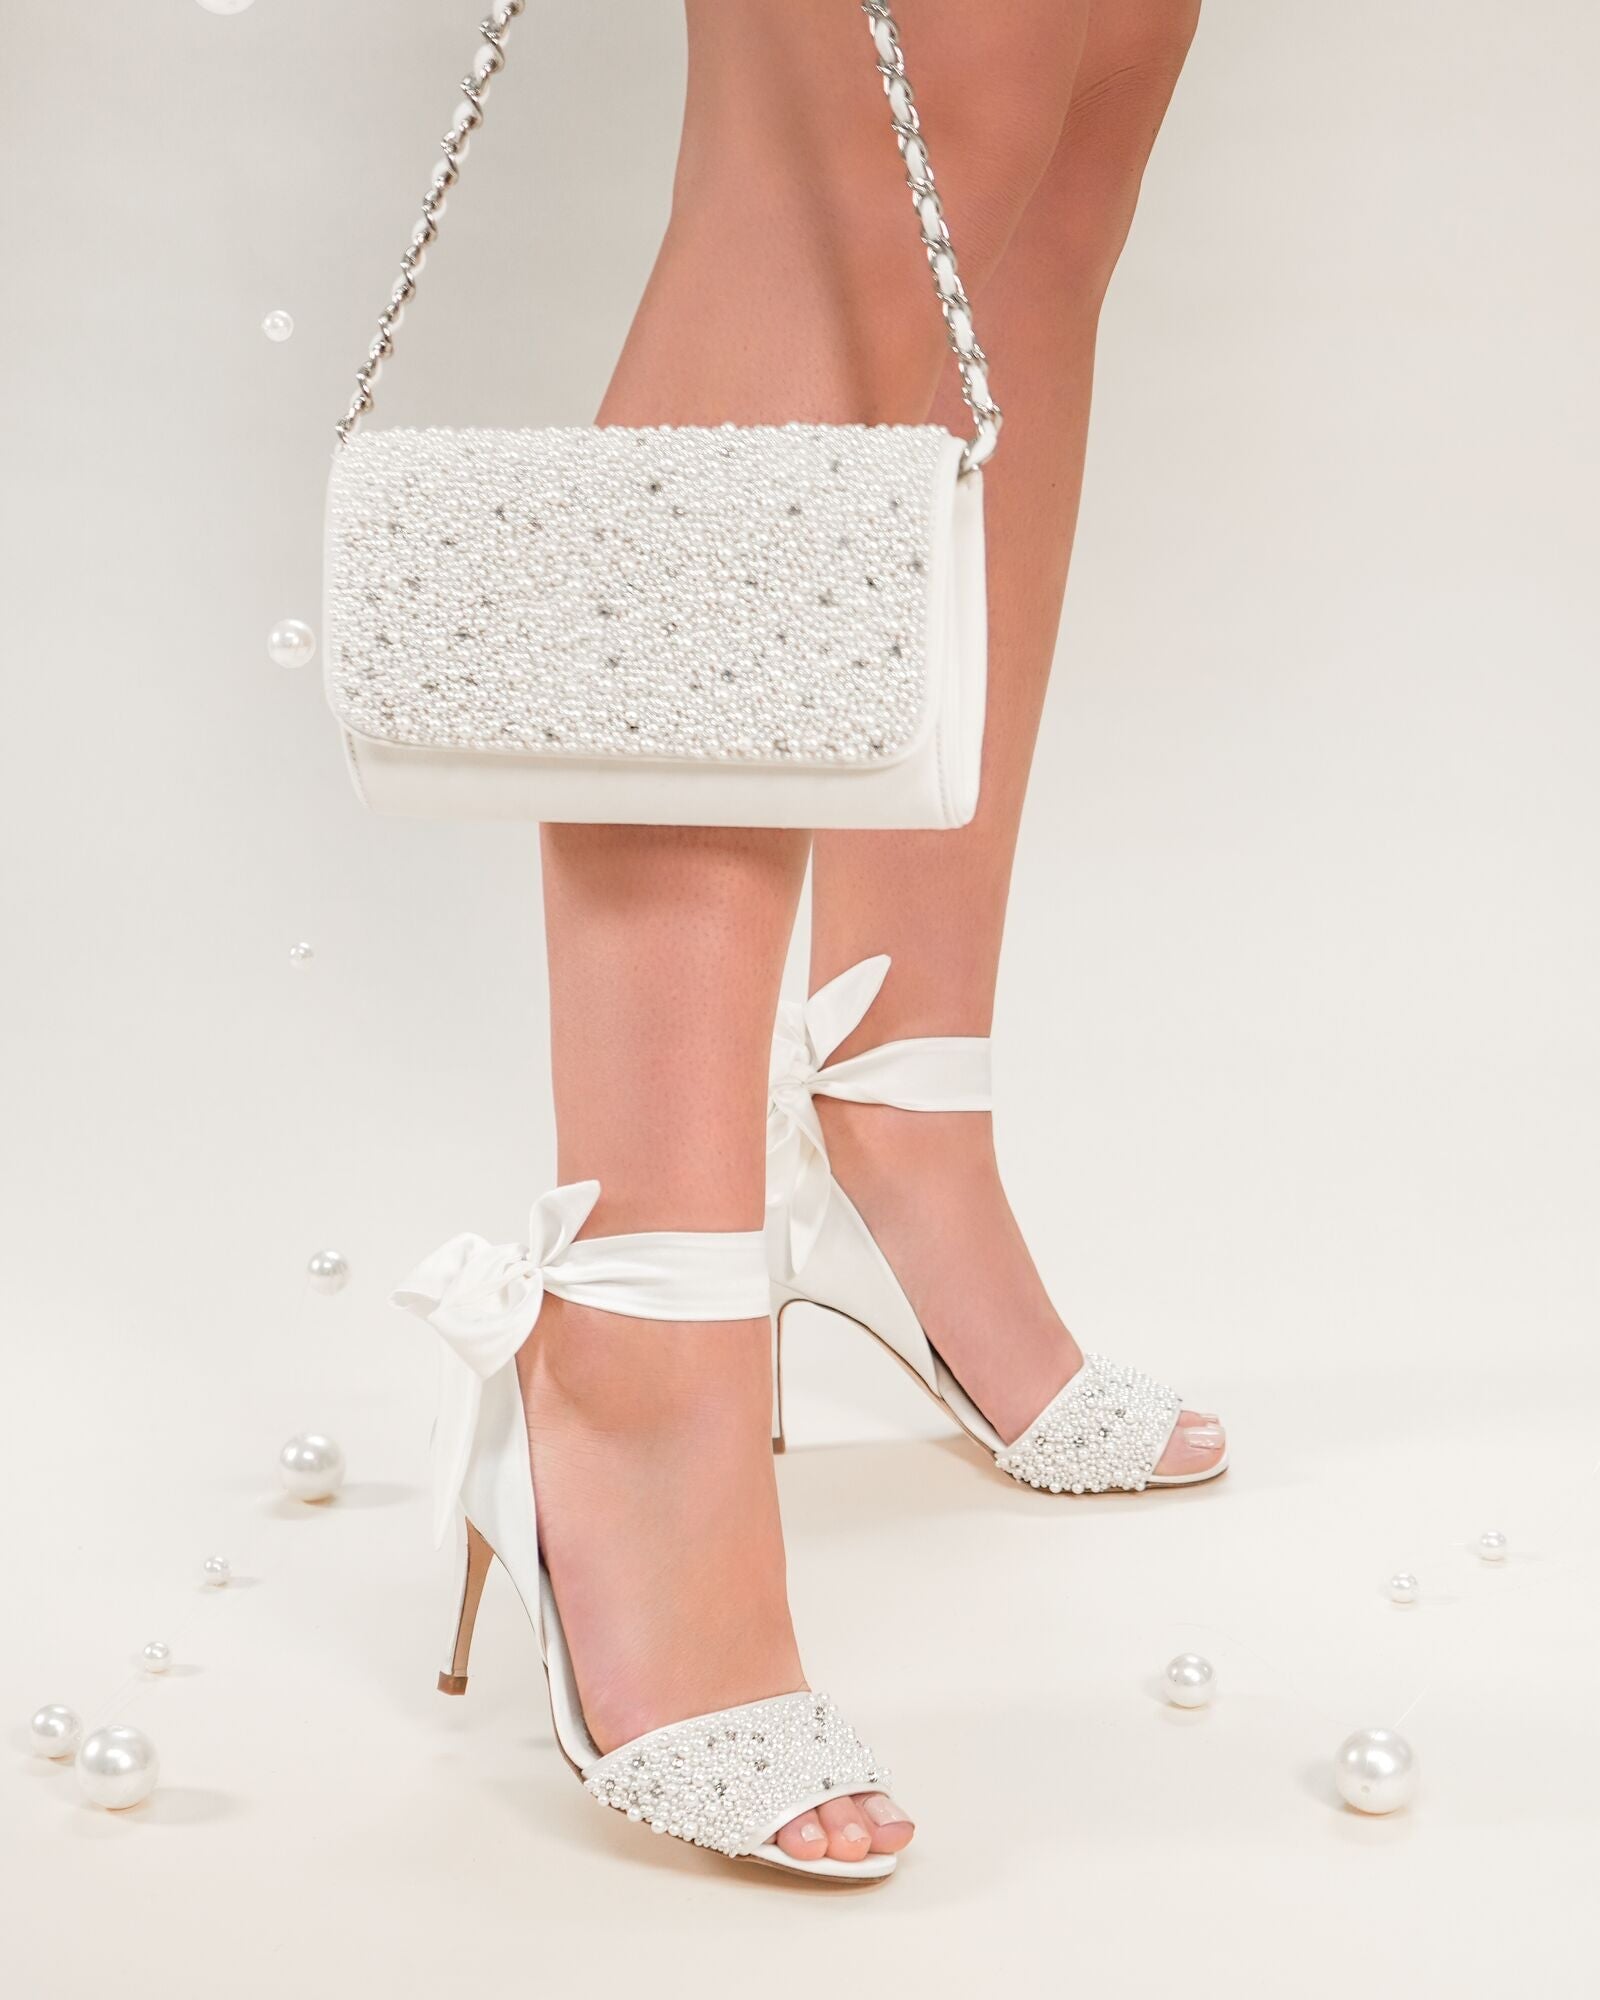 Daisy Oyster Pearl Mid Heel image